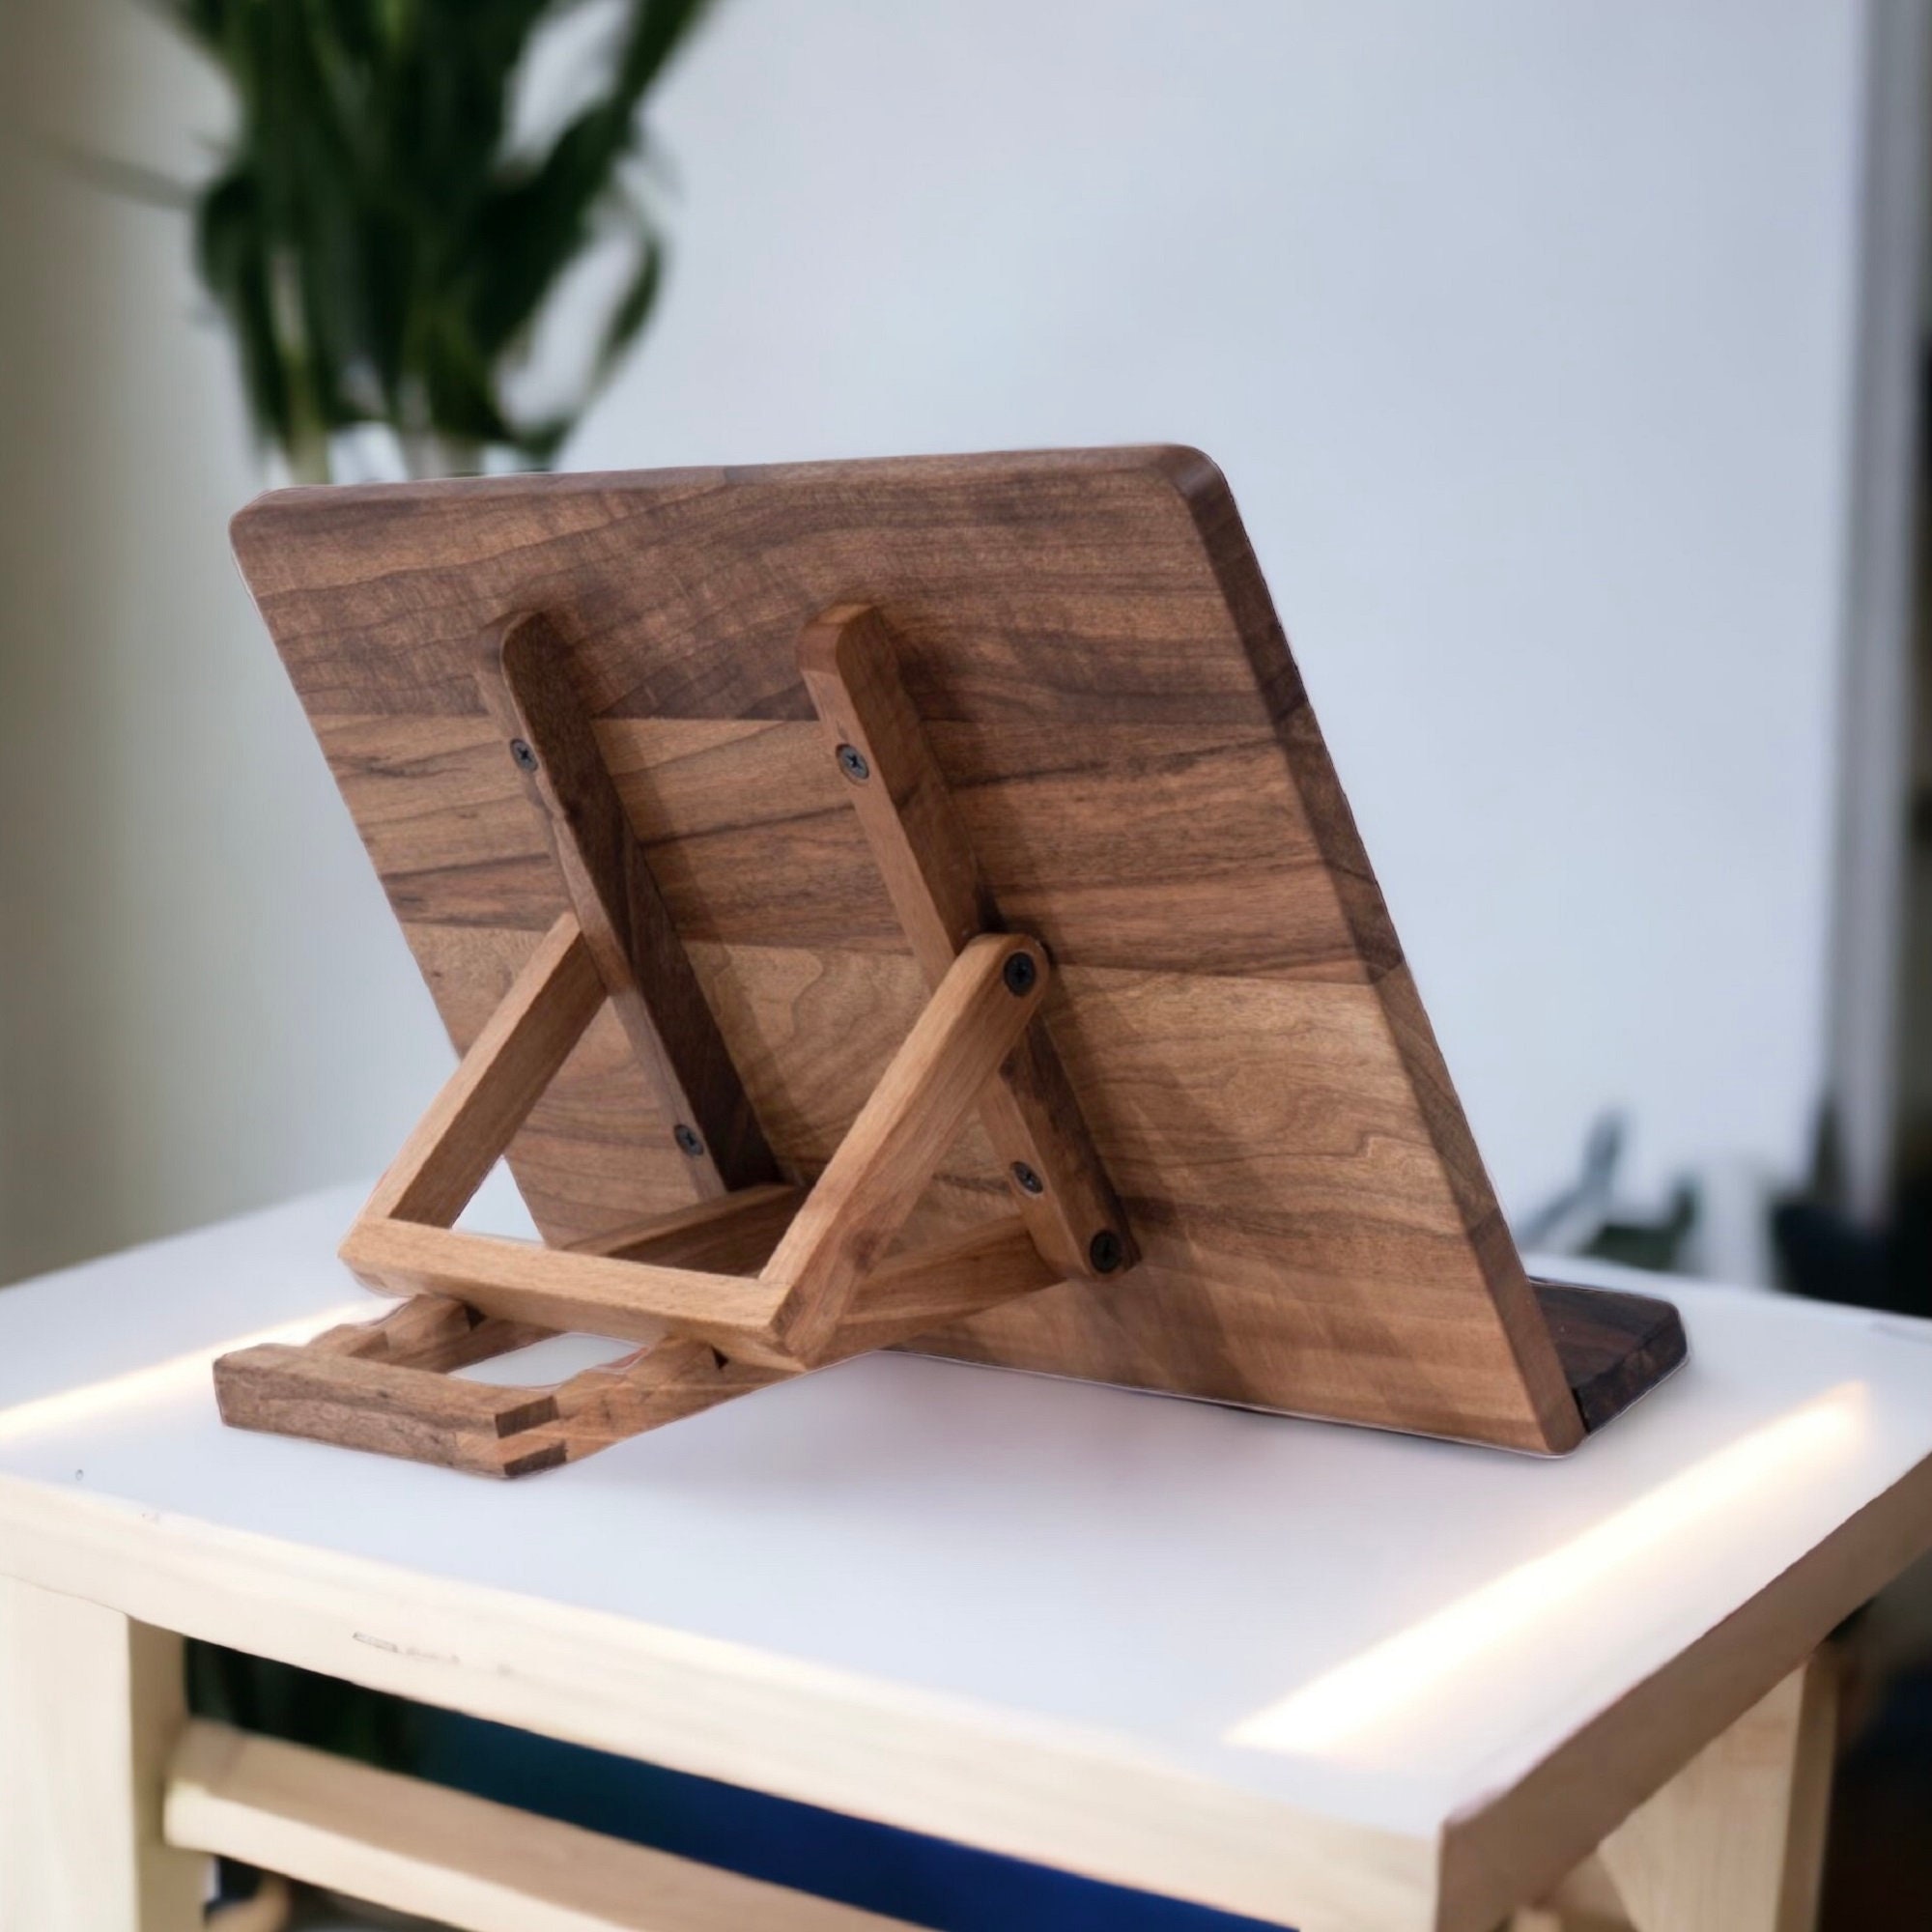 Handcrafted Wood Book Stand from Mexico - Words of Wisdom